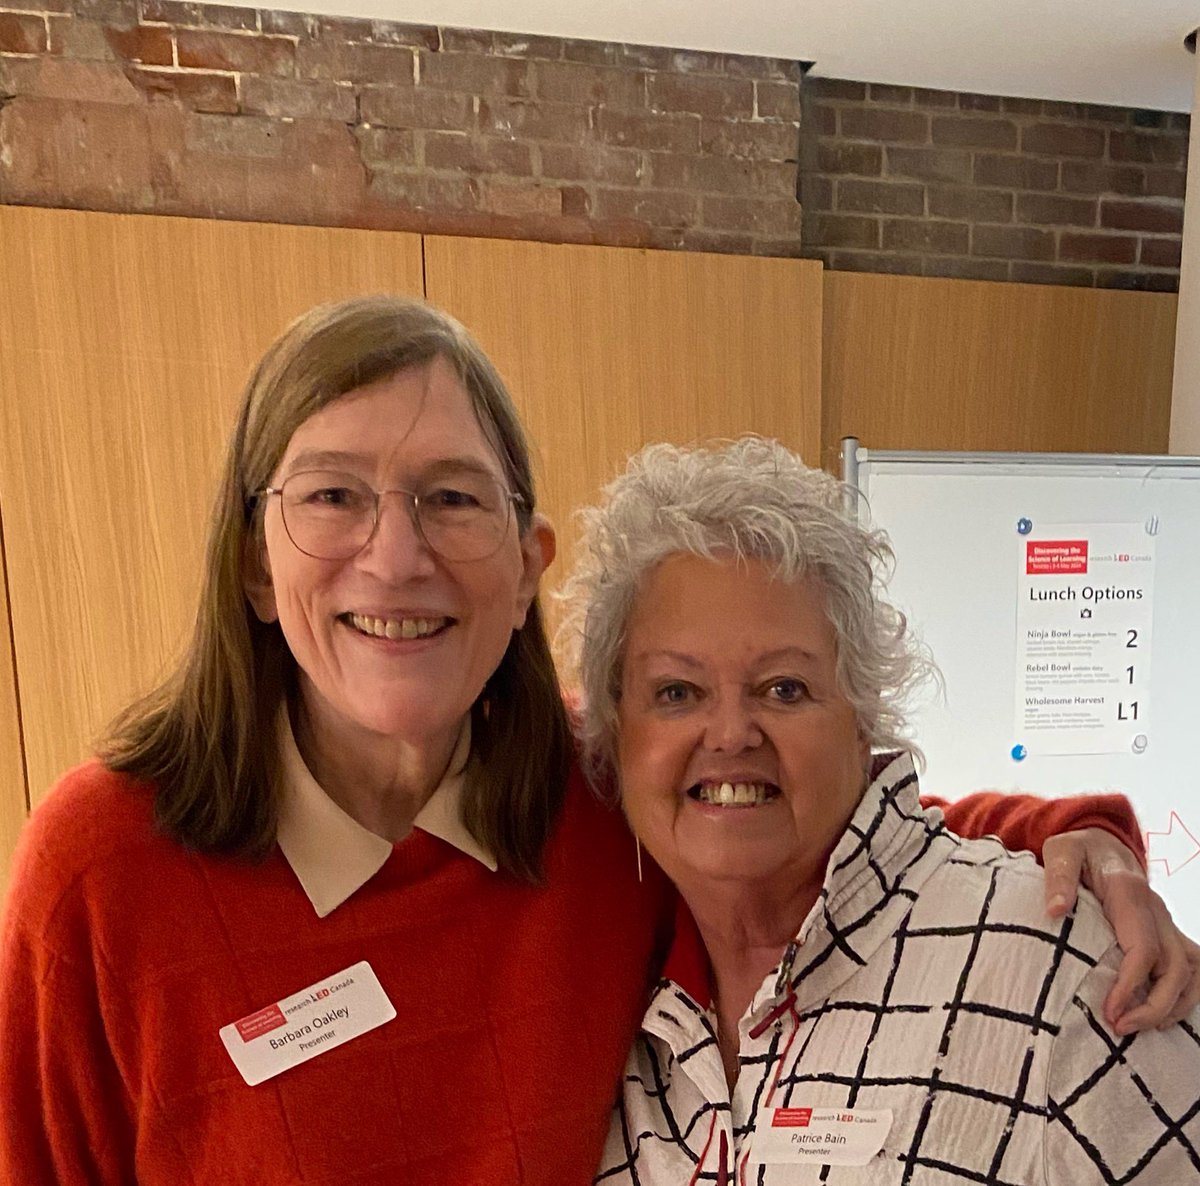 What an incredible day! Congrats #rEDTO24 for a fabulous session! Look at the amazing speakers! Met many wonderful folks-the circle of my kindred spirits has expanded. Guess who was @ my session-#CarlHendrick AND #DanWillingham! Got to meet #BarbaraOakley! What a day❤️